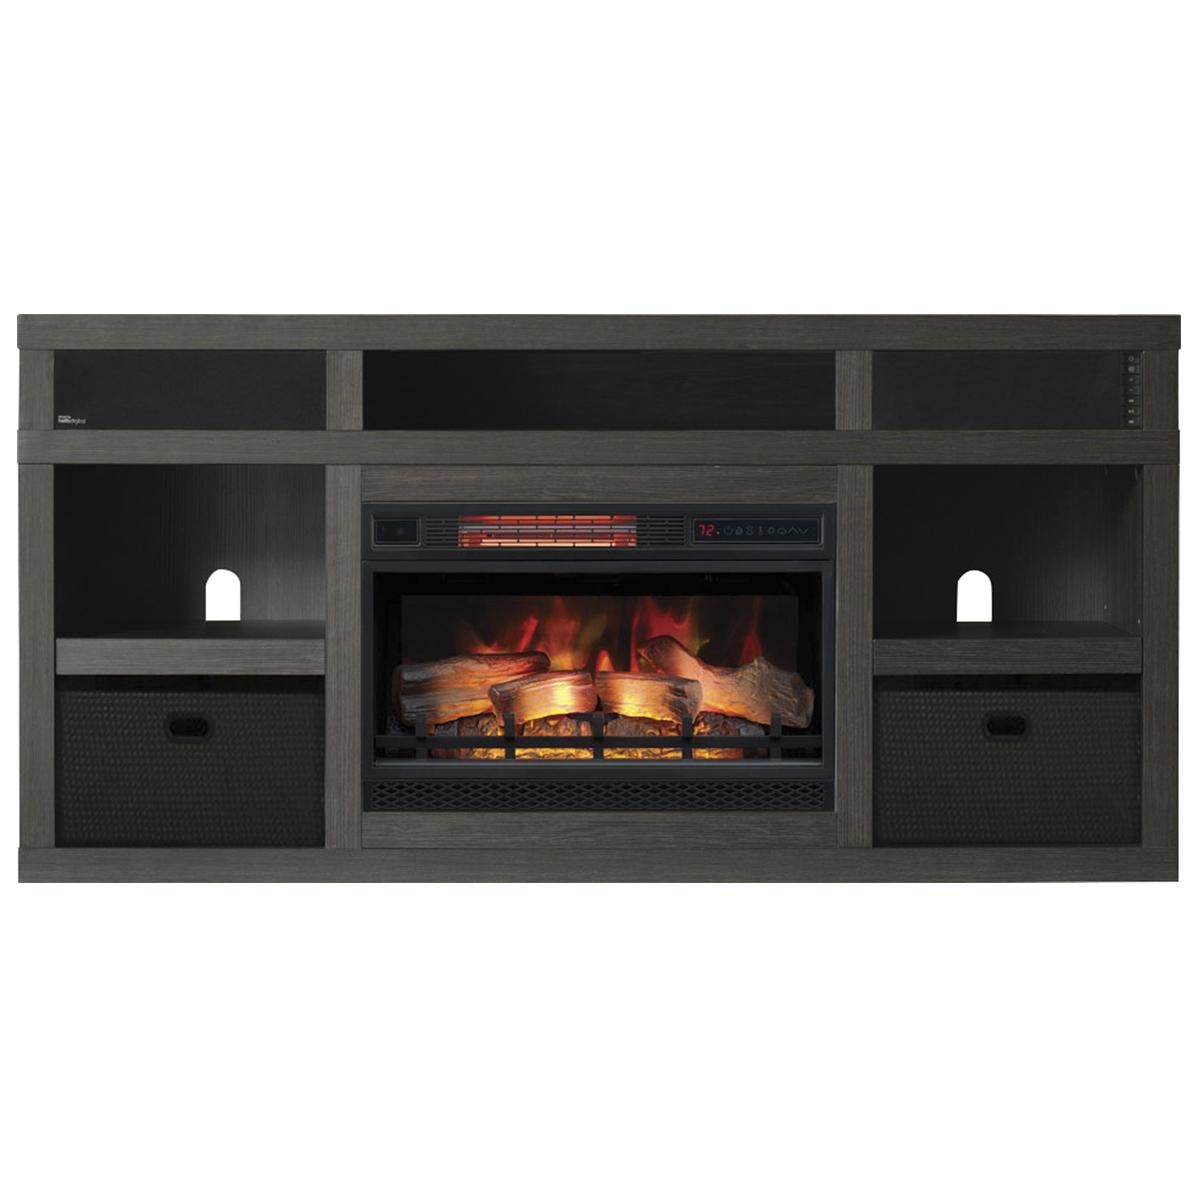 Tv Cabinet with Fireplace Fresh Fabio Flames Greatlin 3 Piece Fireplace Entertainment Wall